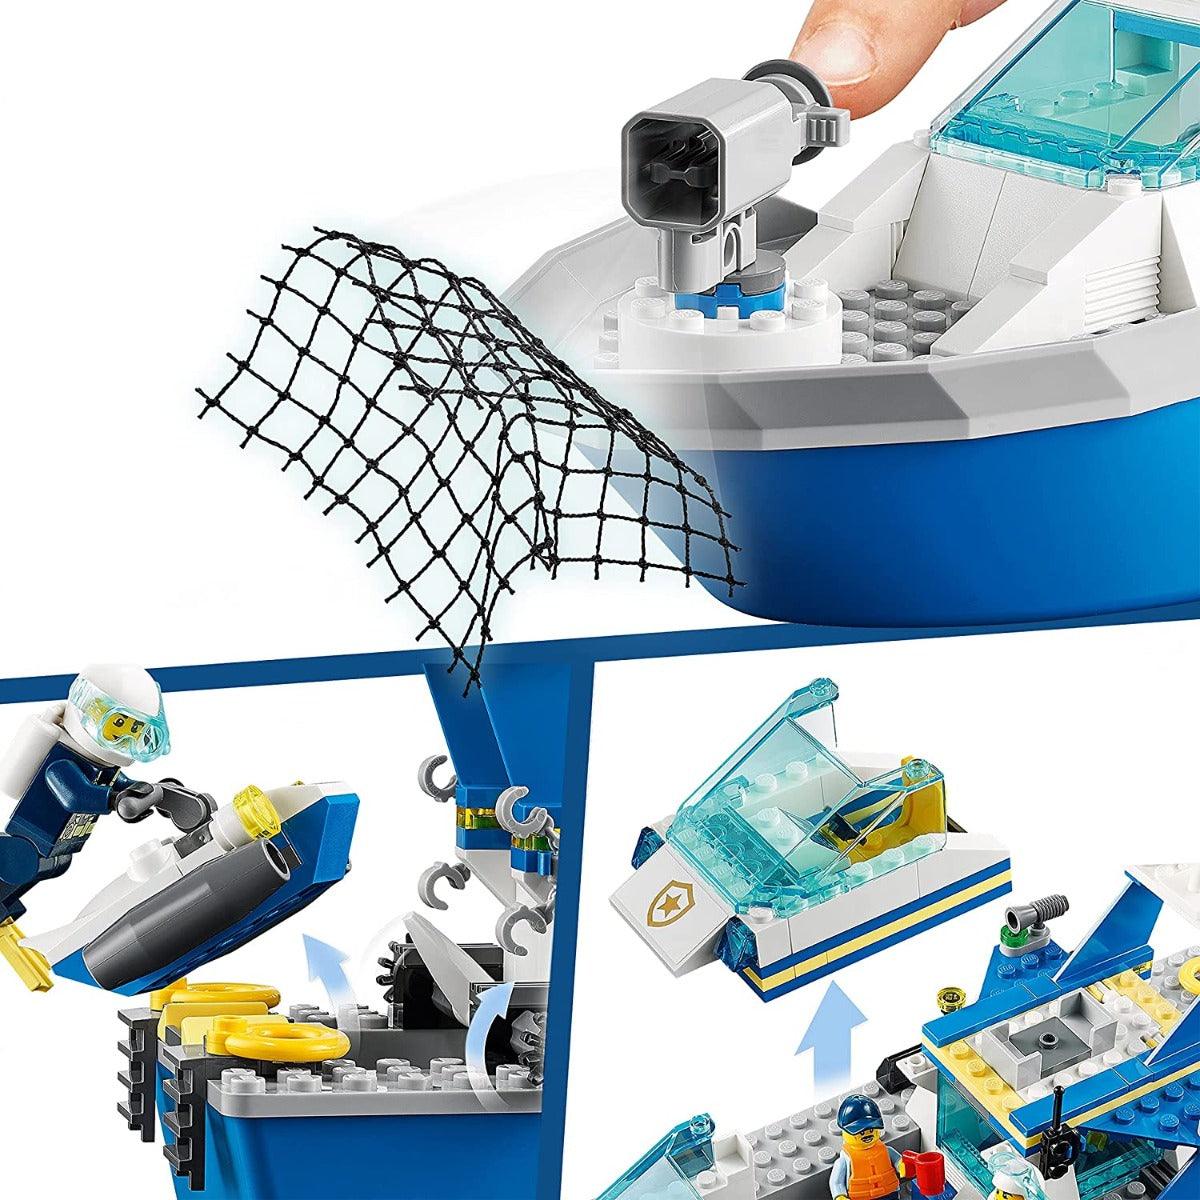 LEGO City Police Patrol Boat Building Kit for Ages 5+